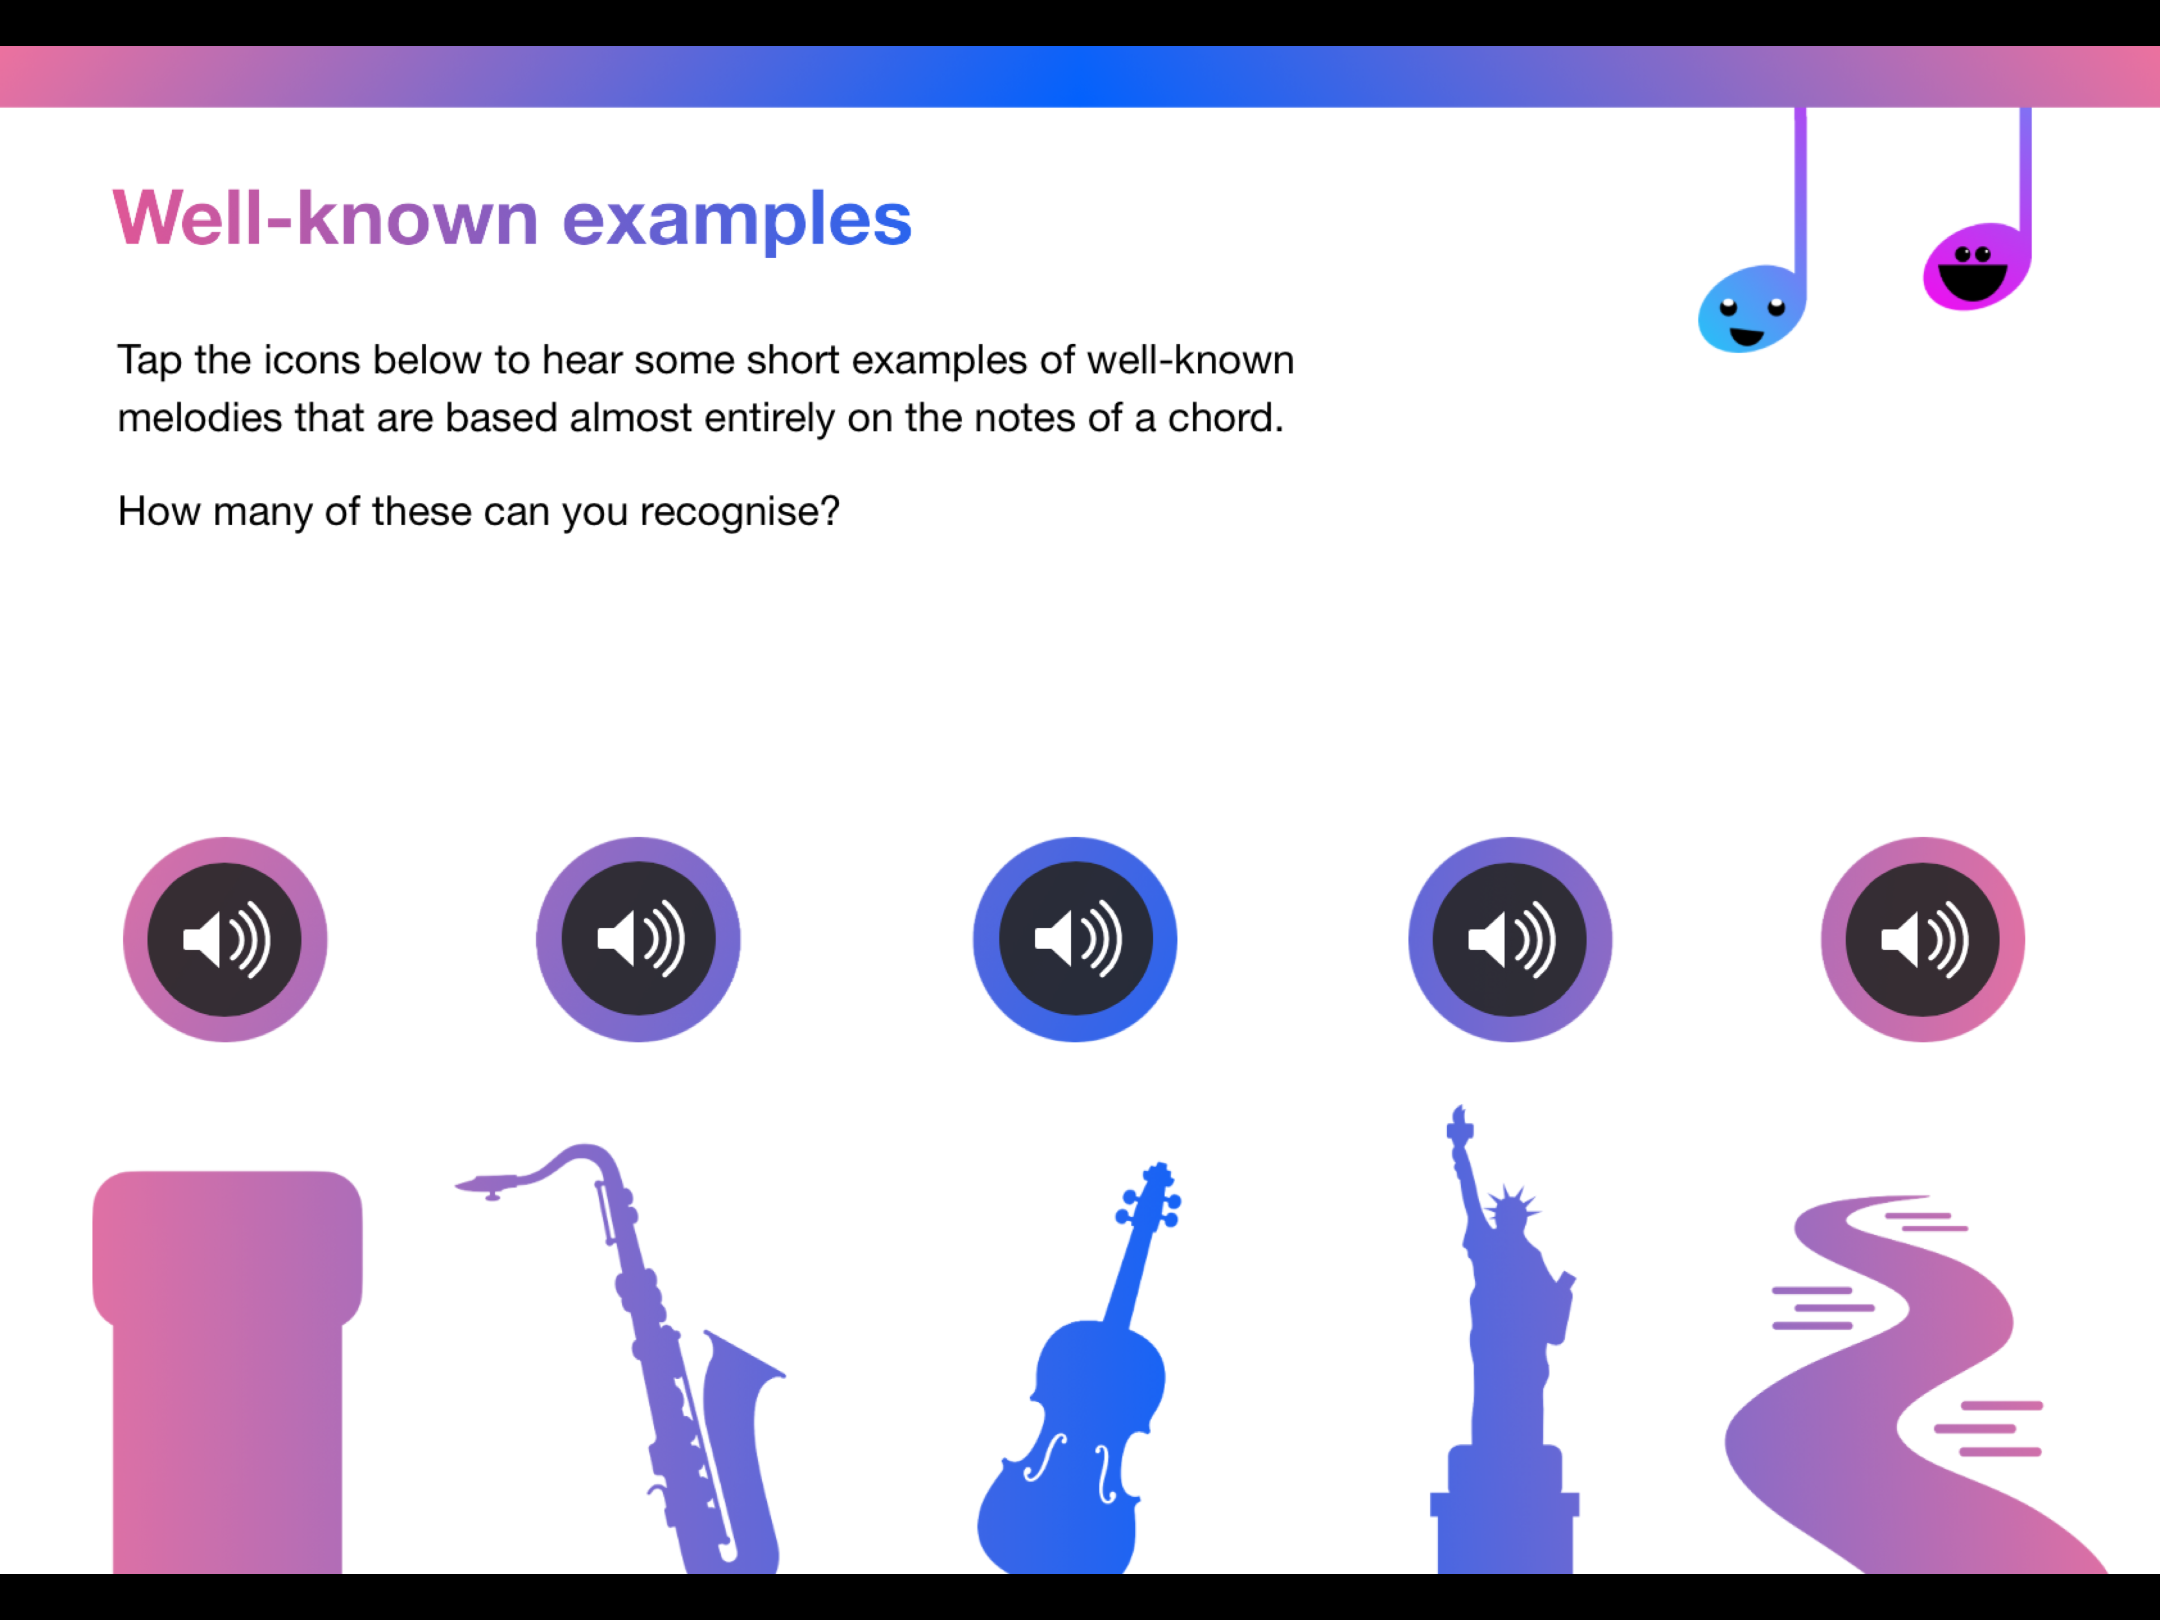 ‘Well-known examples’ page from Character Chords. Audio buttons allow the user to listen to famous chordal melodies.